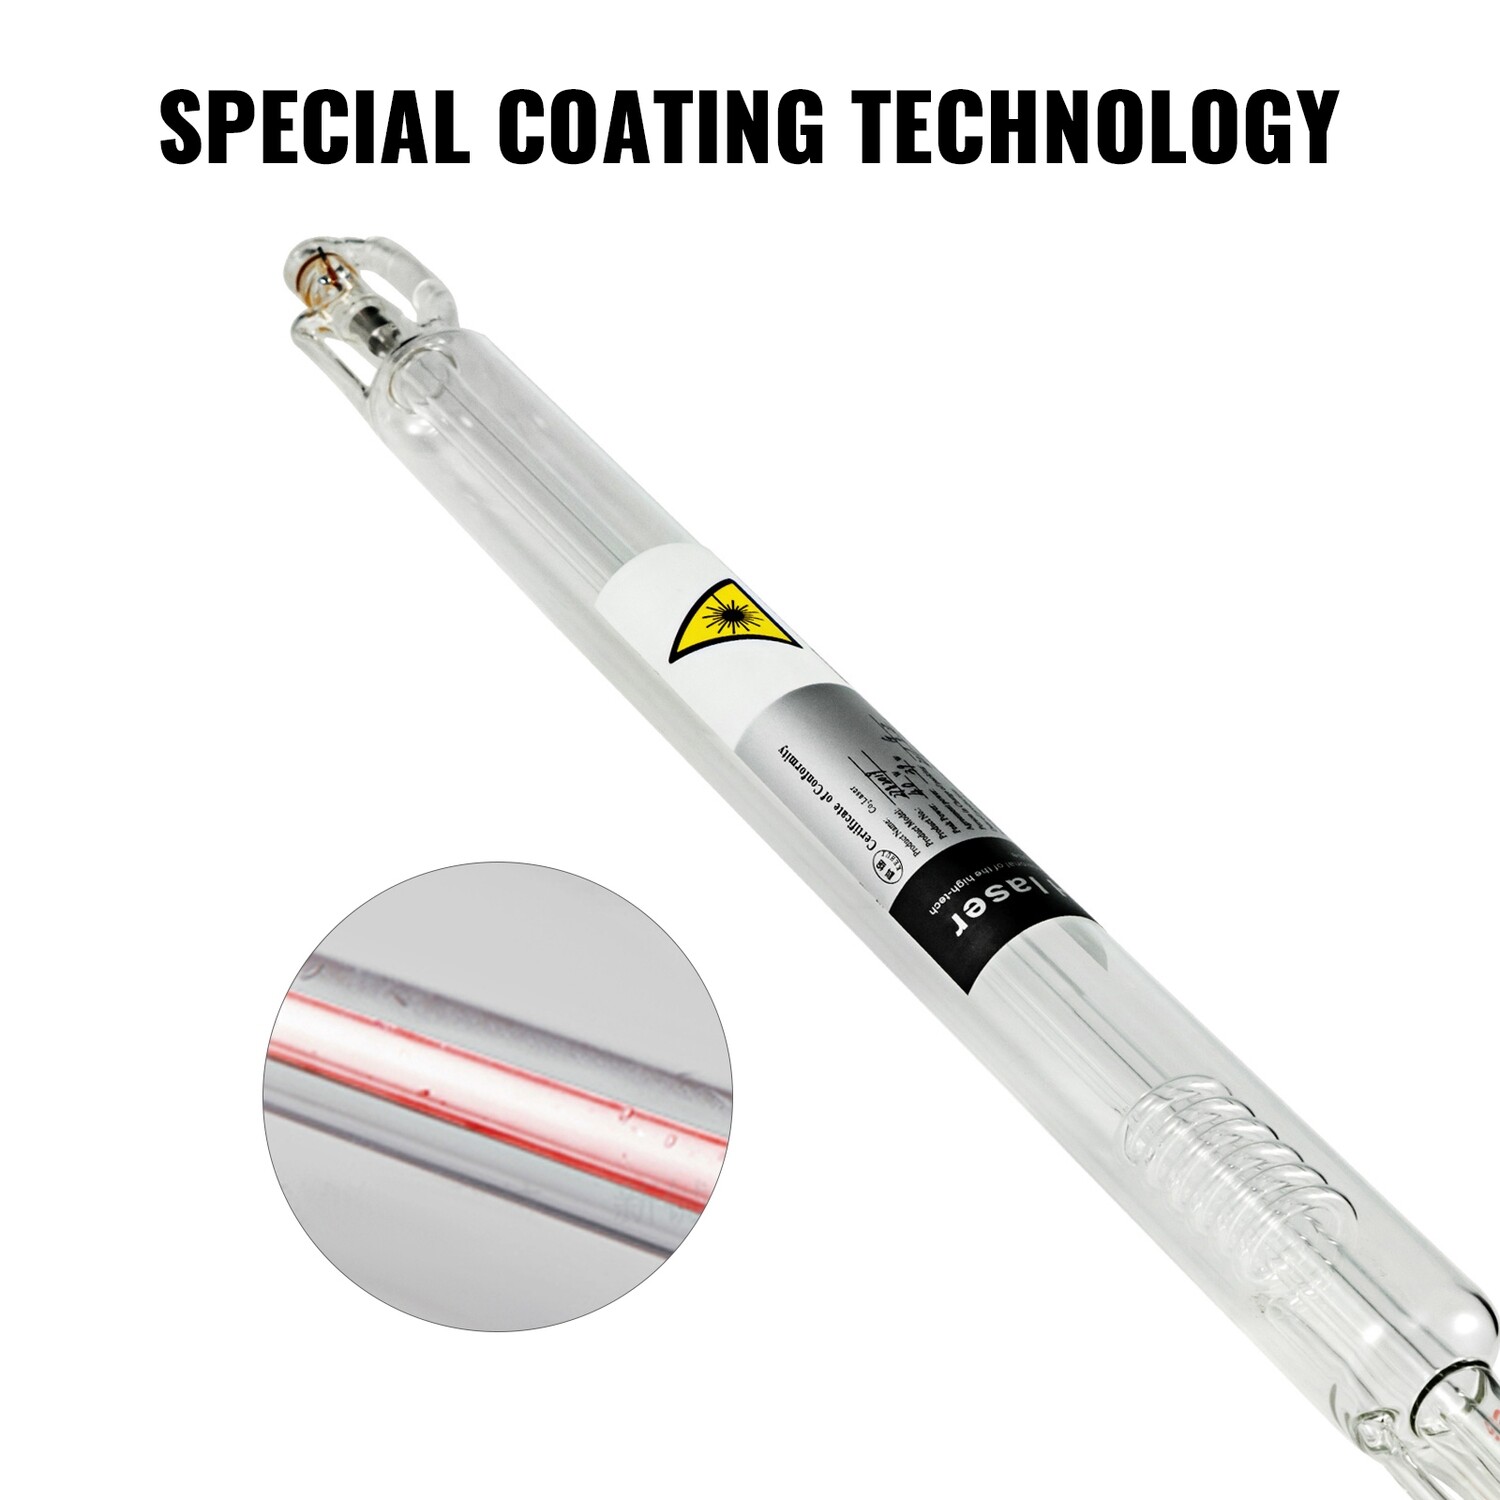 Co2 laser tube 40w 700mm for laser engraving and cutting equipment